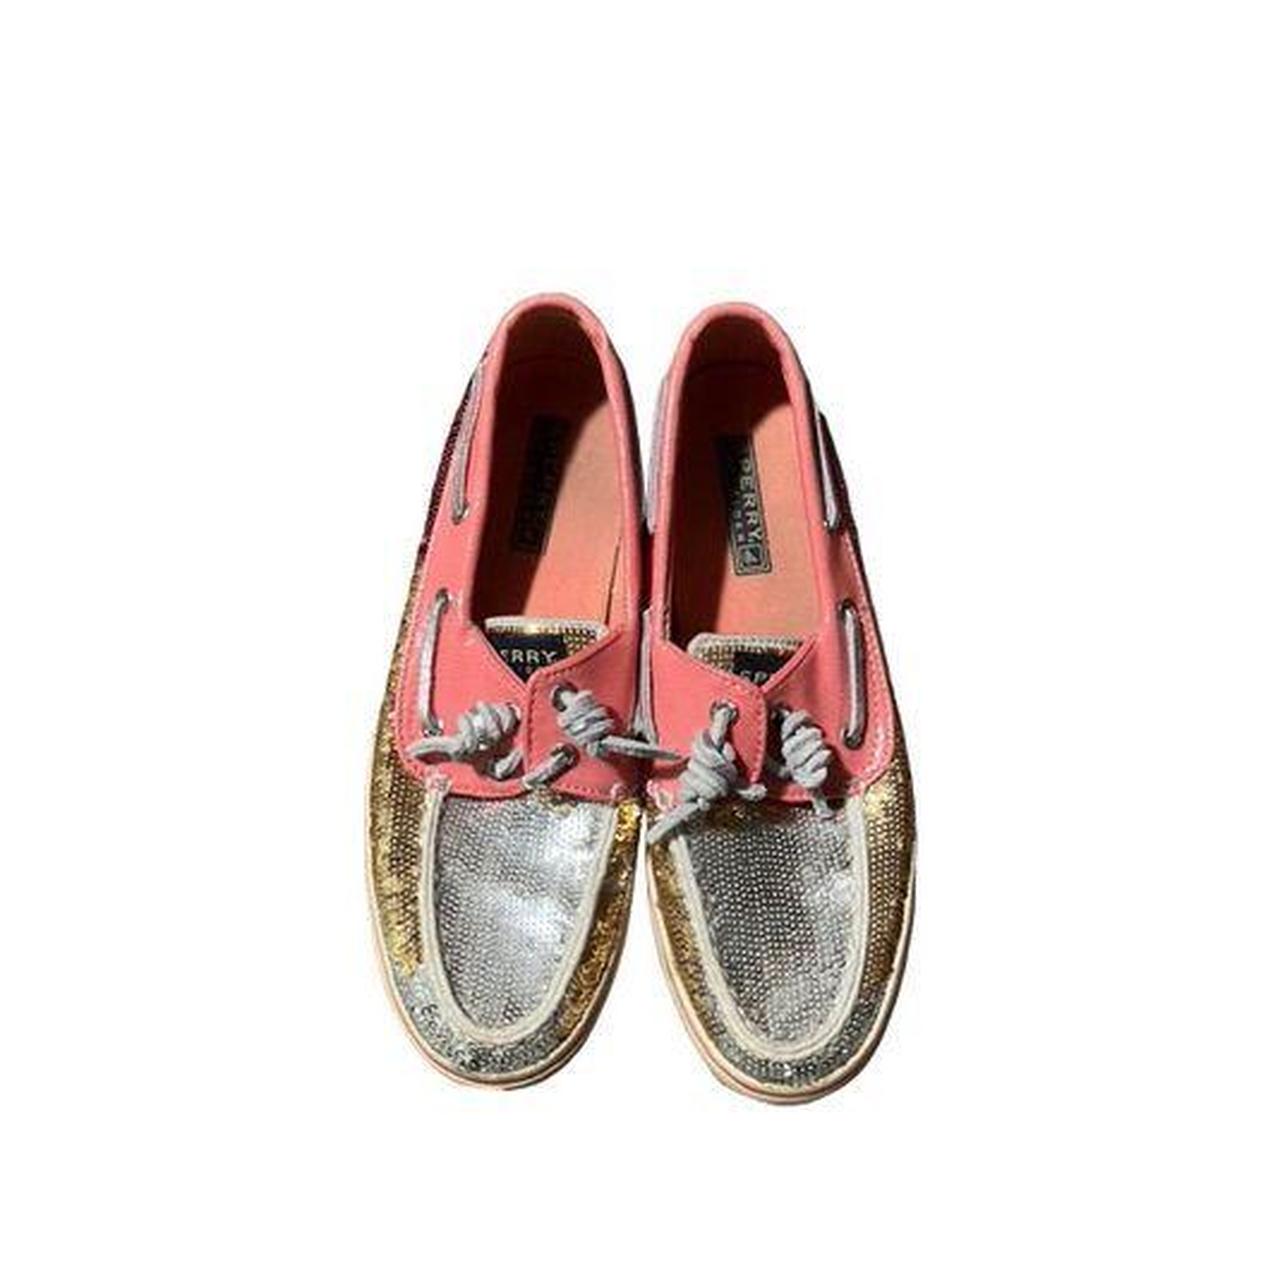 Sperry Women's Pink and Silver Loafers (2)